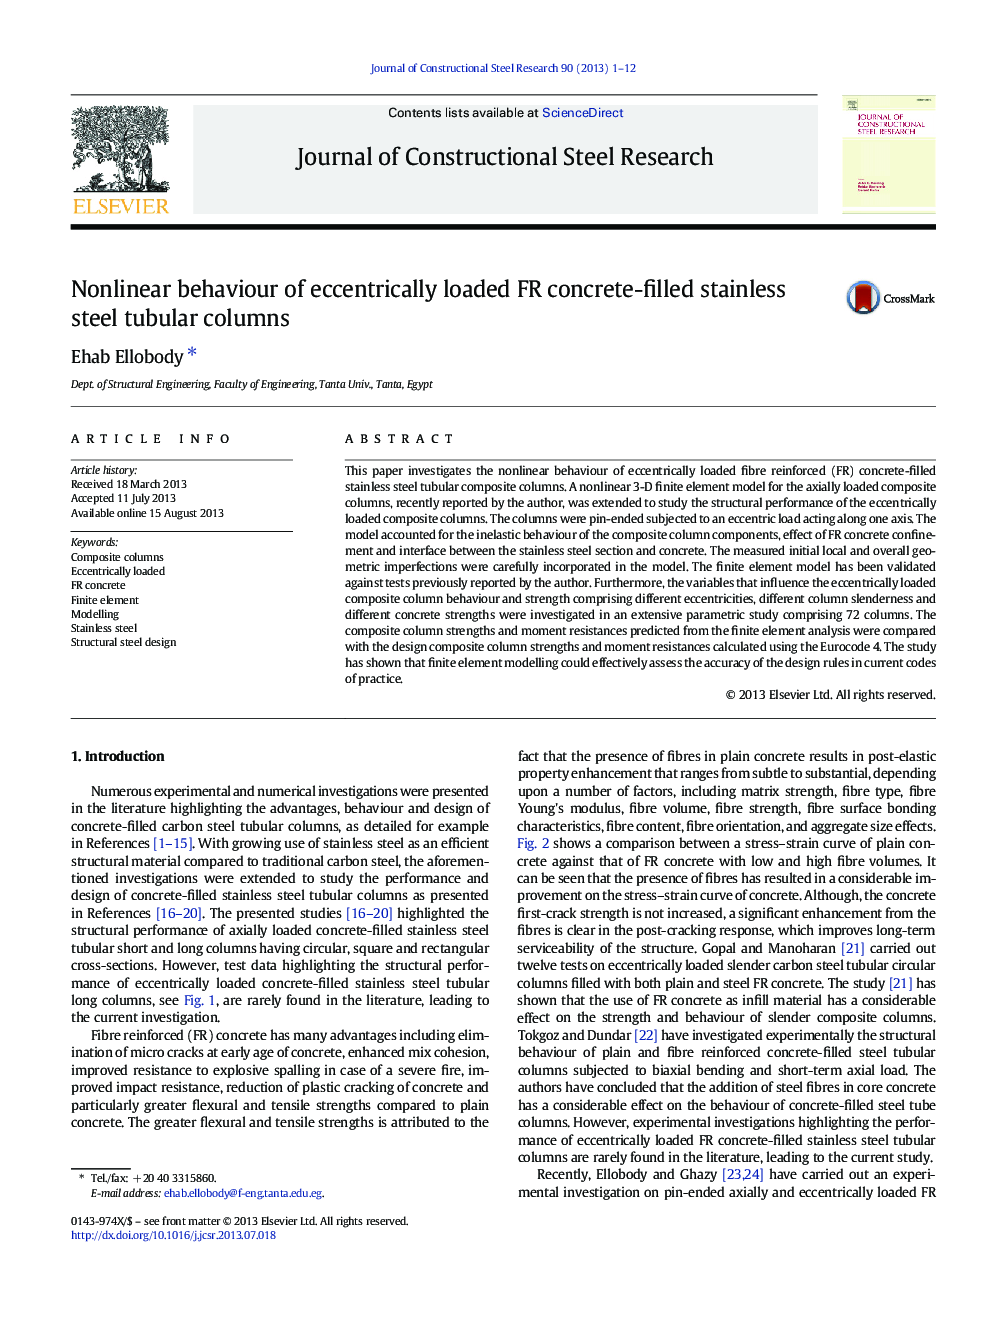 Nonlinear behaviour of eccentrically loaded FR concrete-filled stainless steel tubular columns